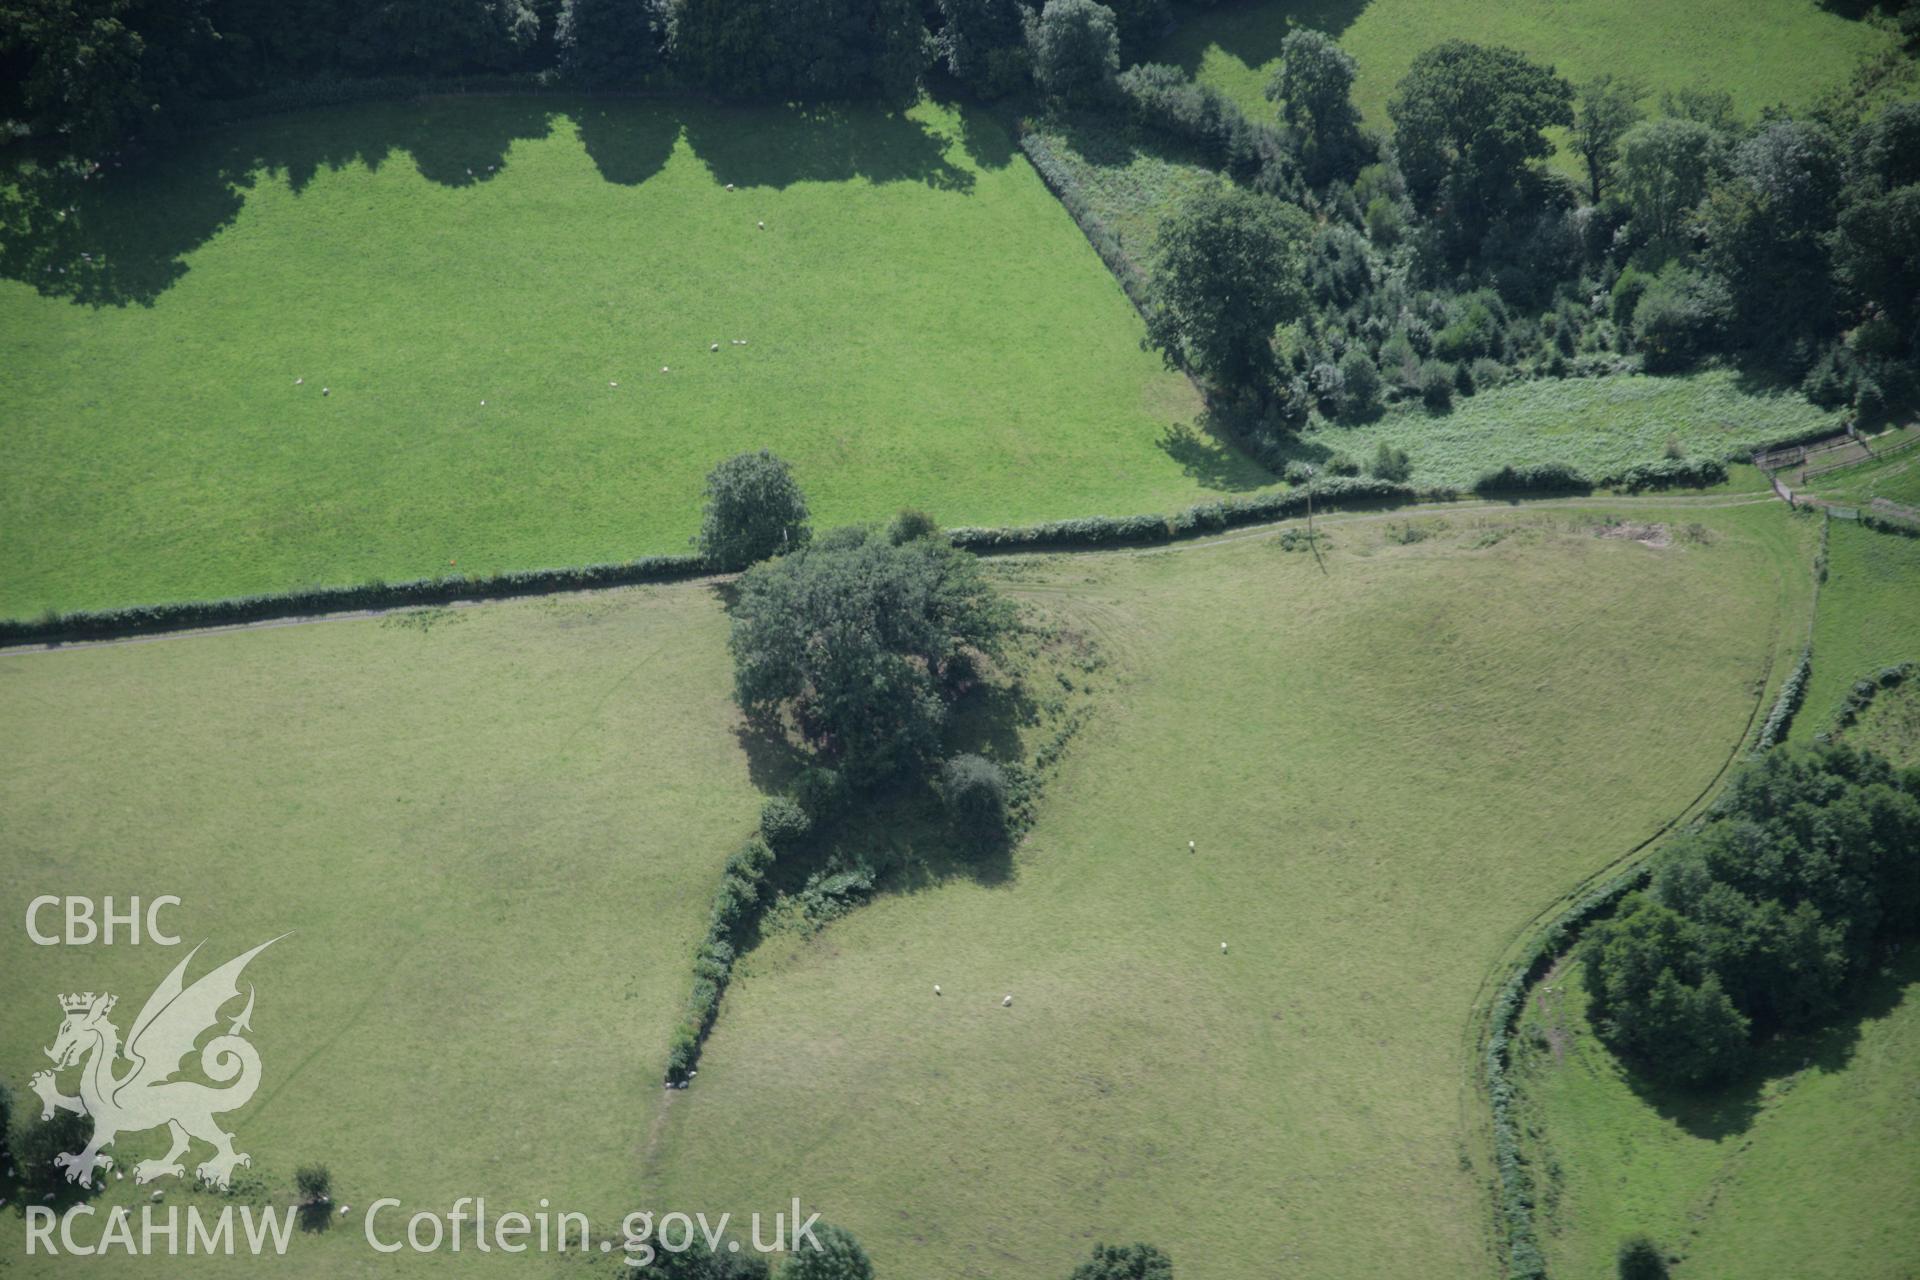 RCAHMW colour oblique aerial photograph of Castell Caemaerdy from the north. Taken on 02 September 2005 by Toby Driver